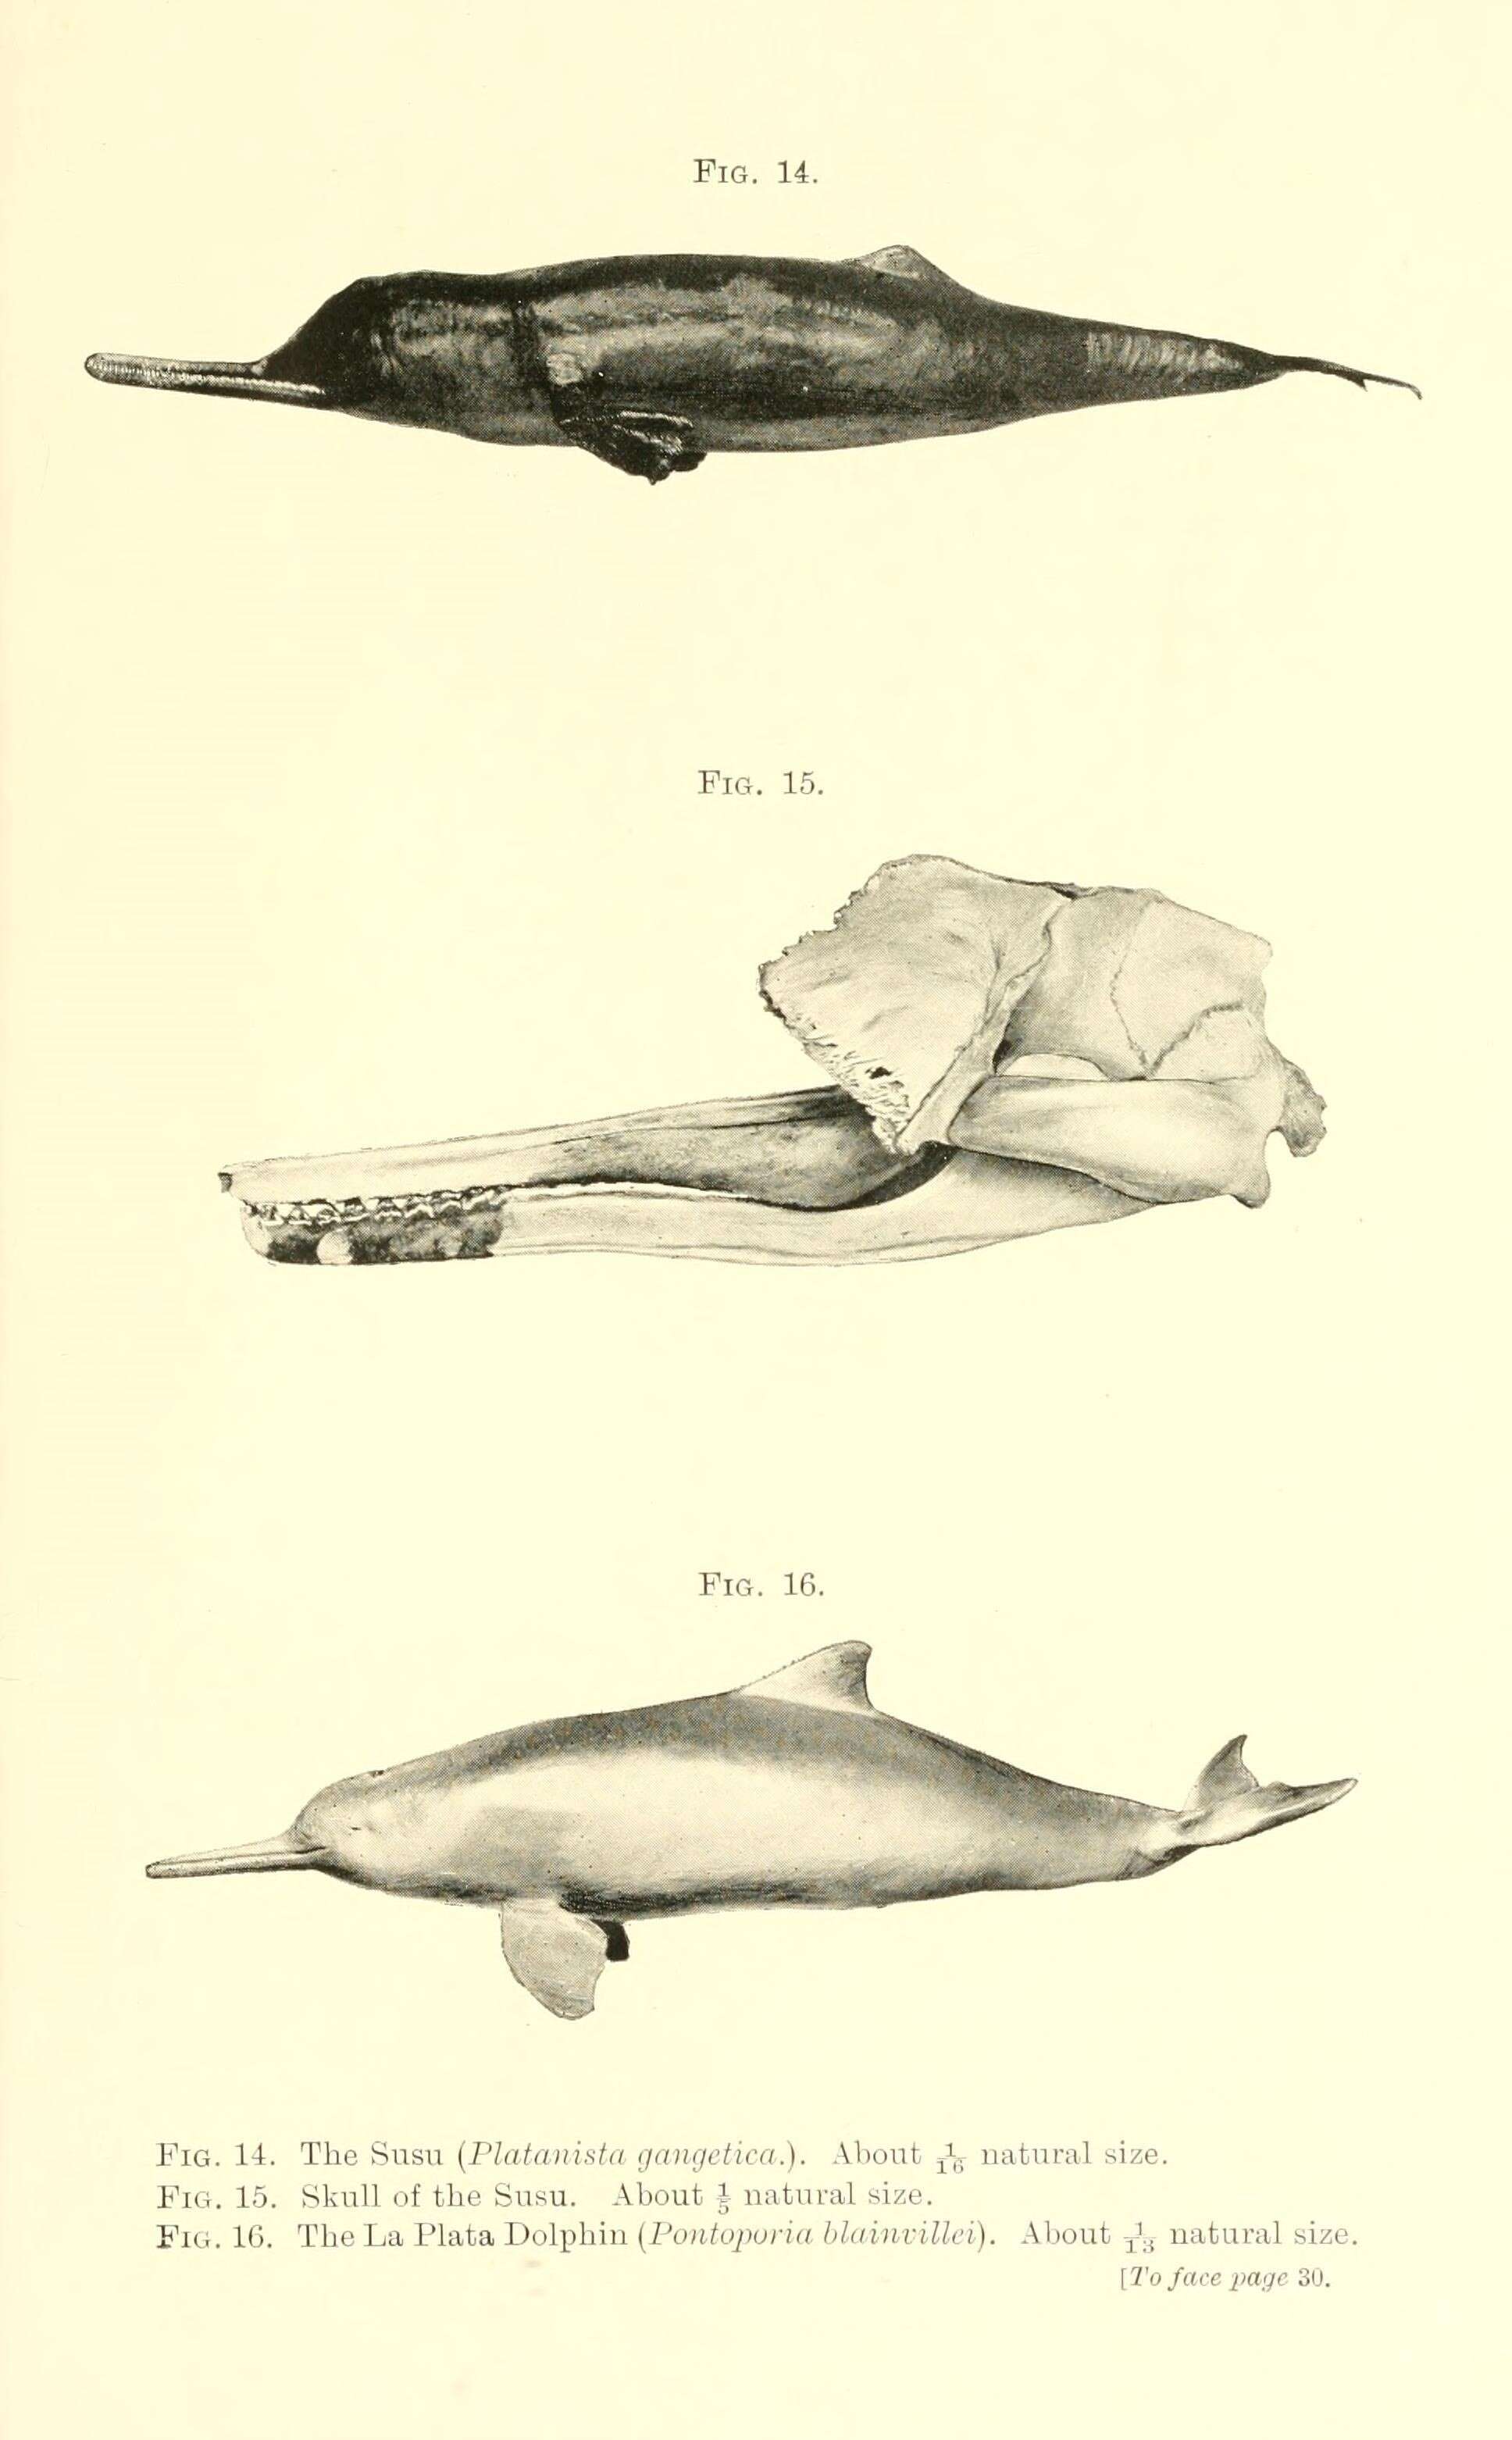 Image of Indian river dolphins